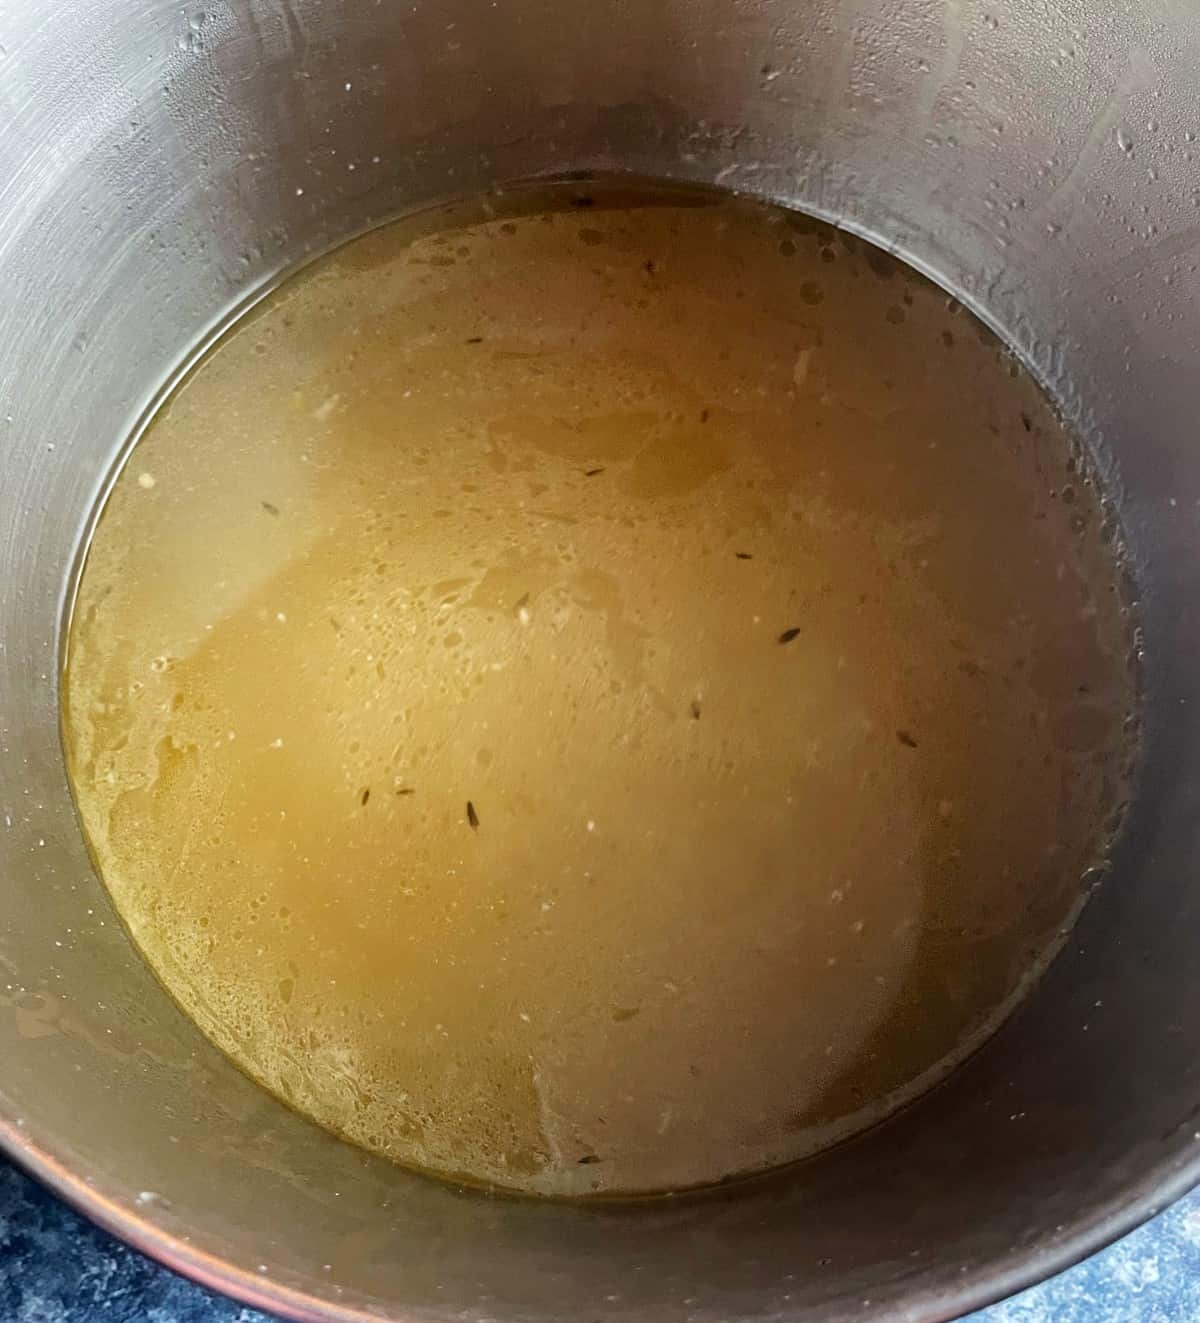 Finished broth in pan